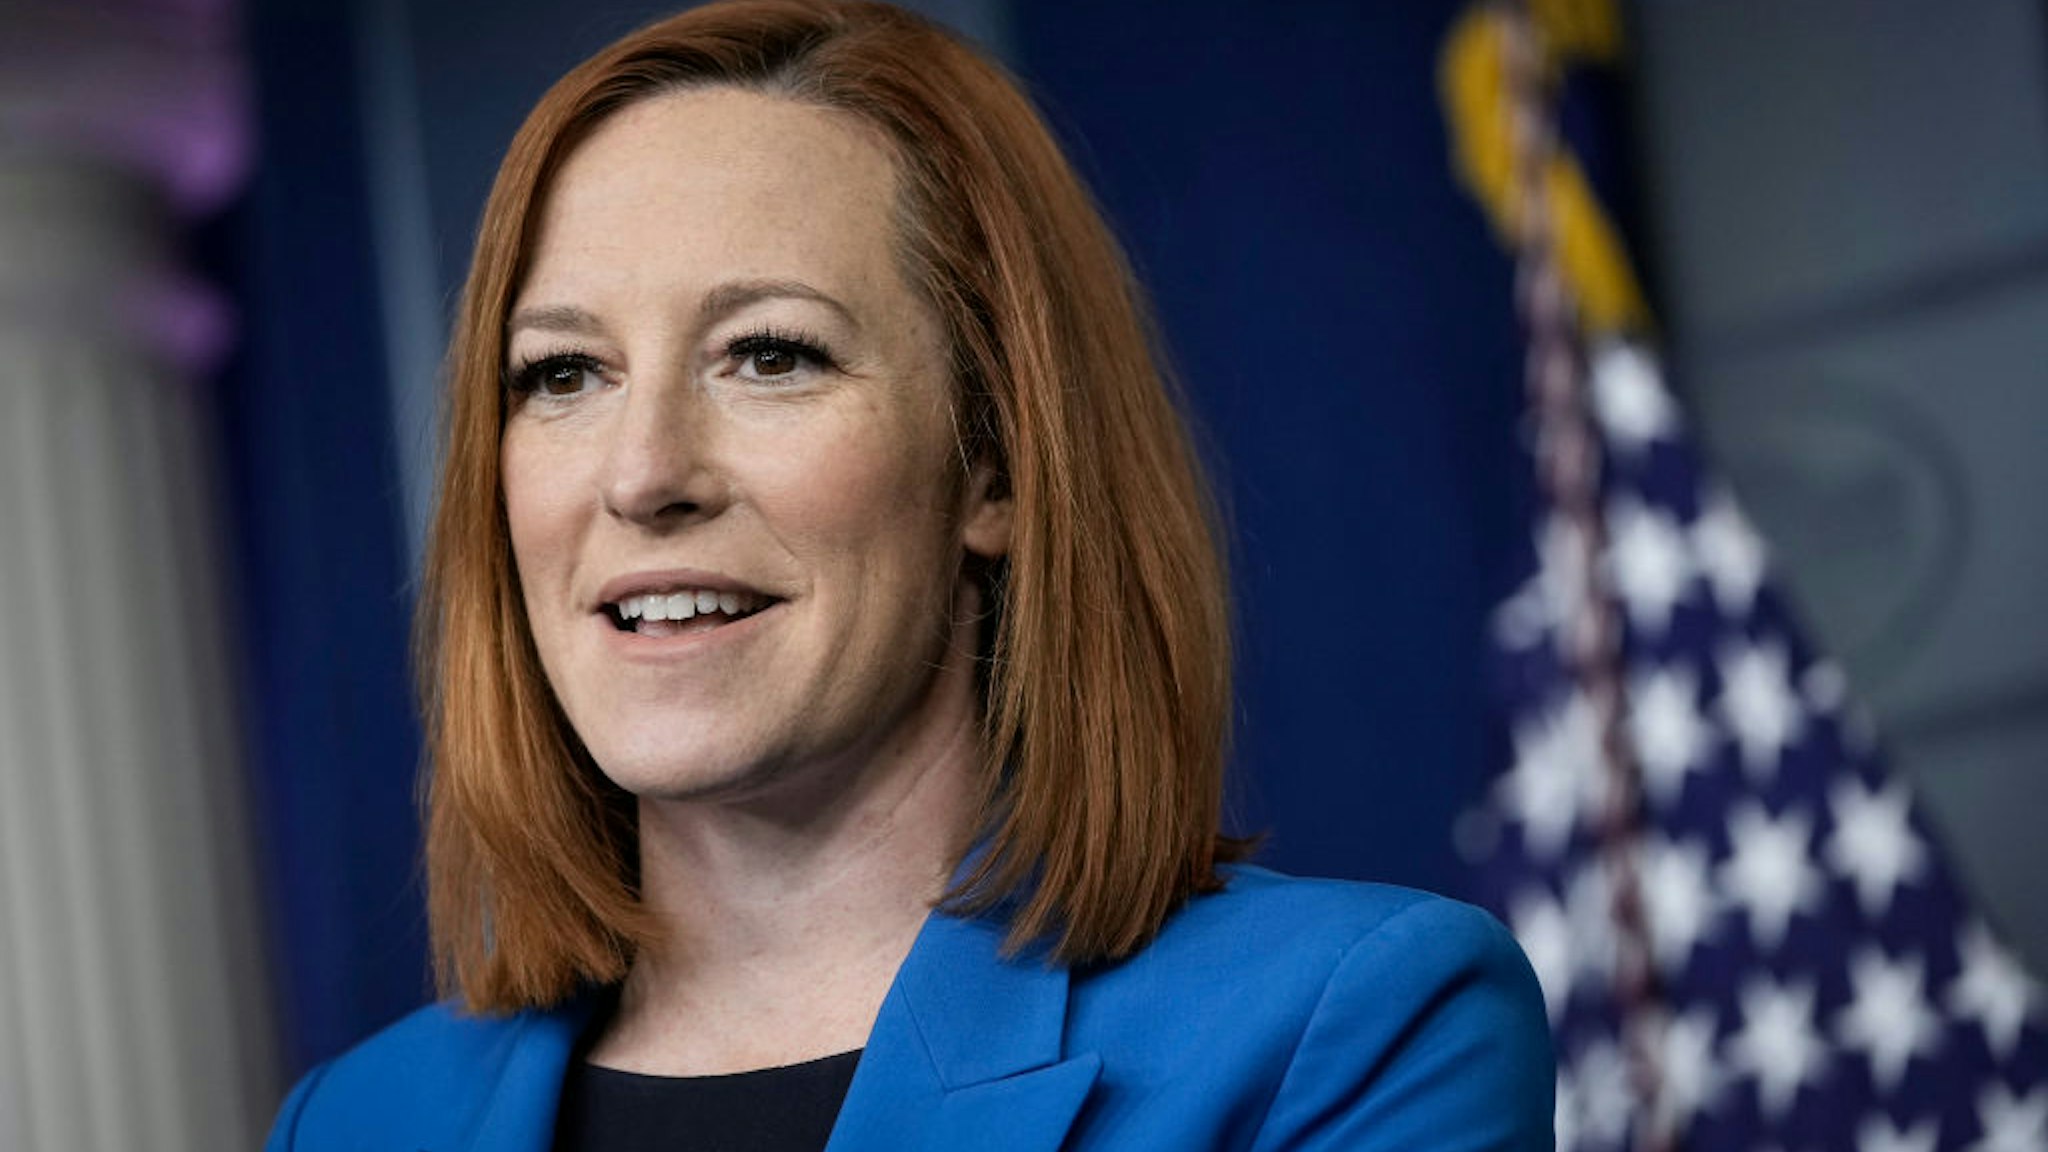 White House Press Secretary Jen Psaki speaks during the daily press briefing at the White House on April 26, 2021 in Washington, DC.